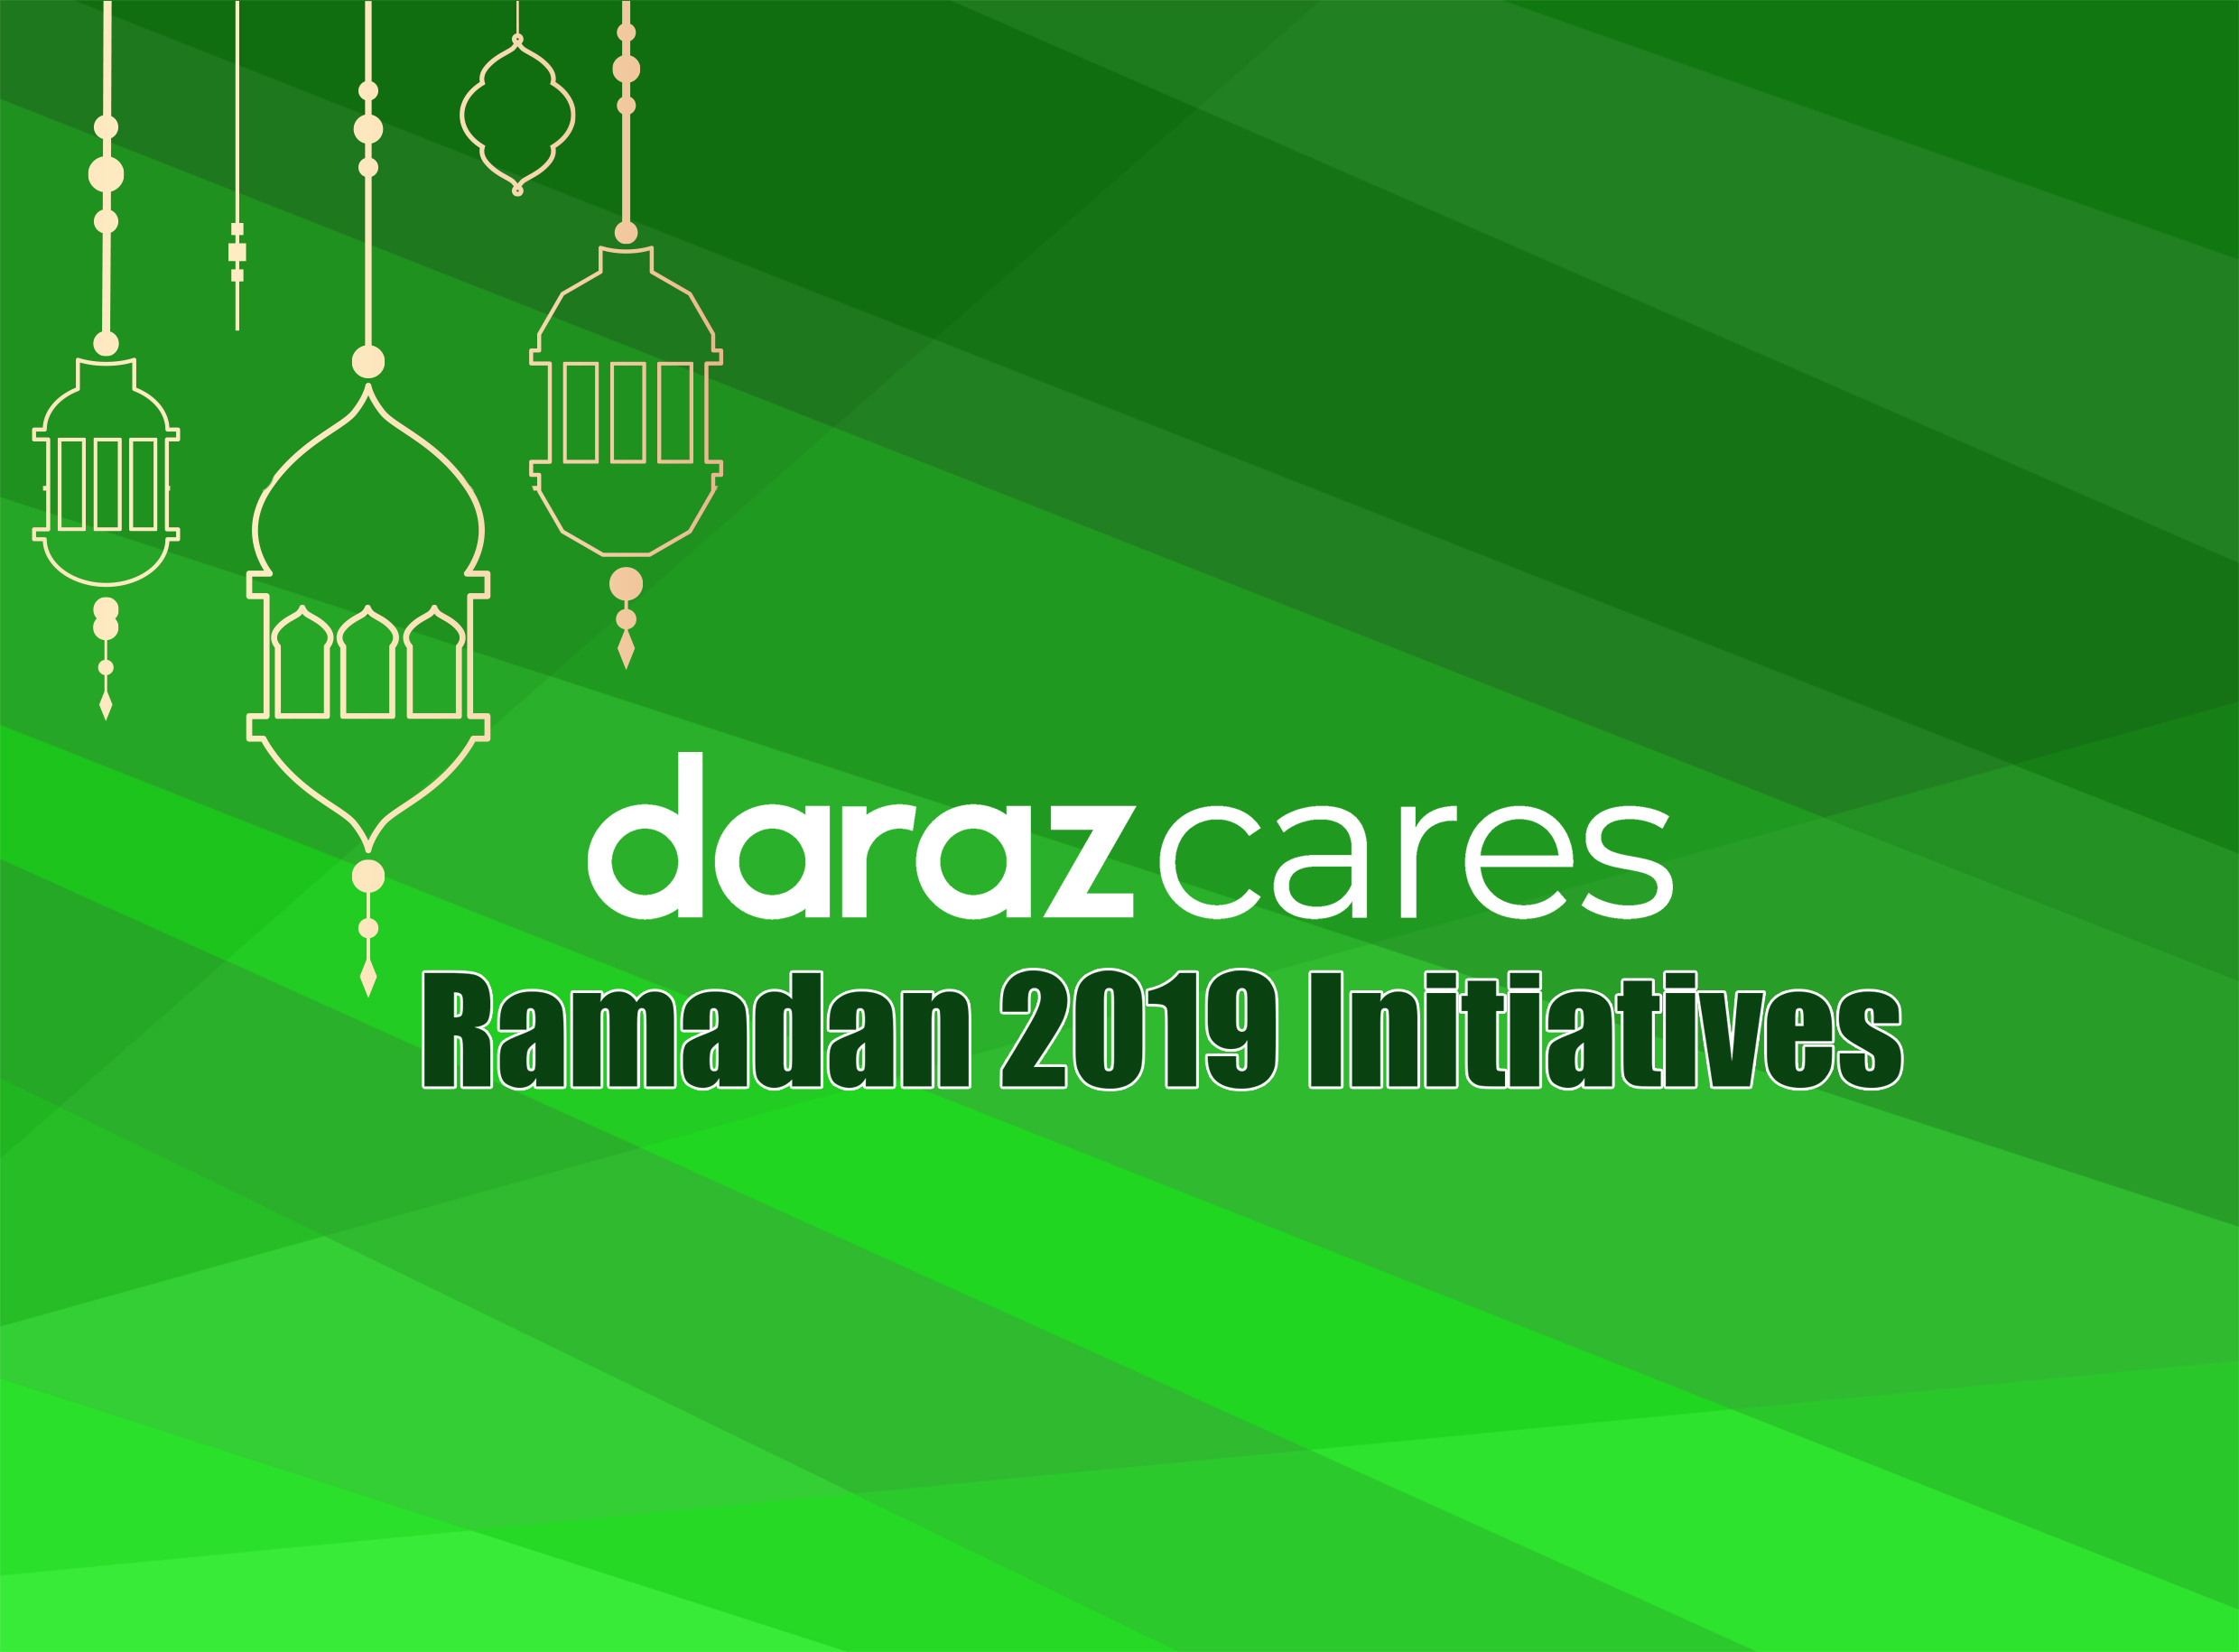  Daraz Cares: Here’s How Daraz Gave Back to the Community in Ramadan 2019